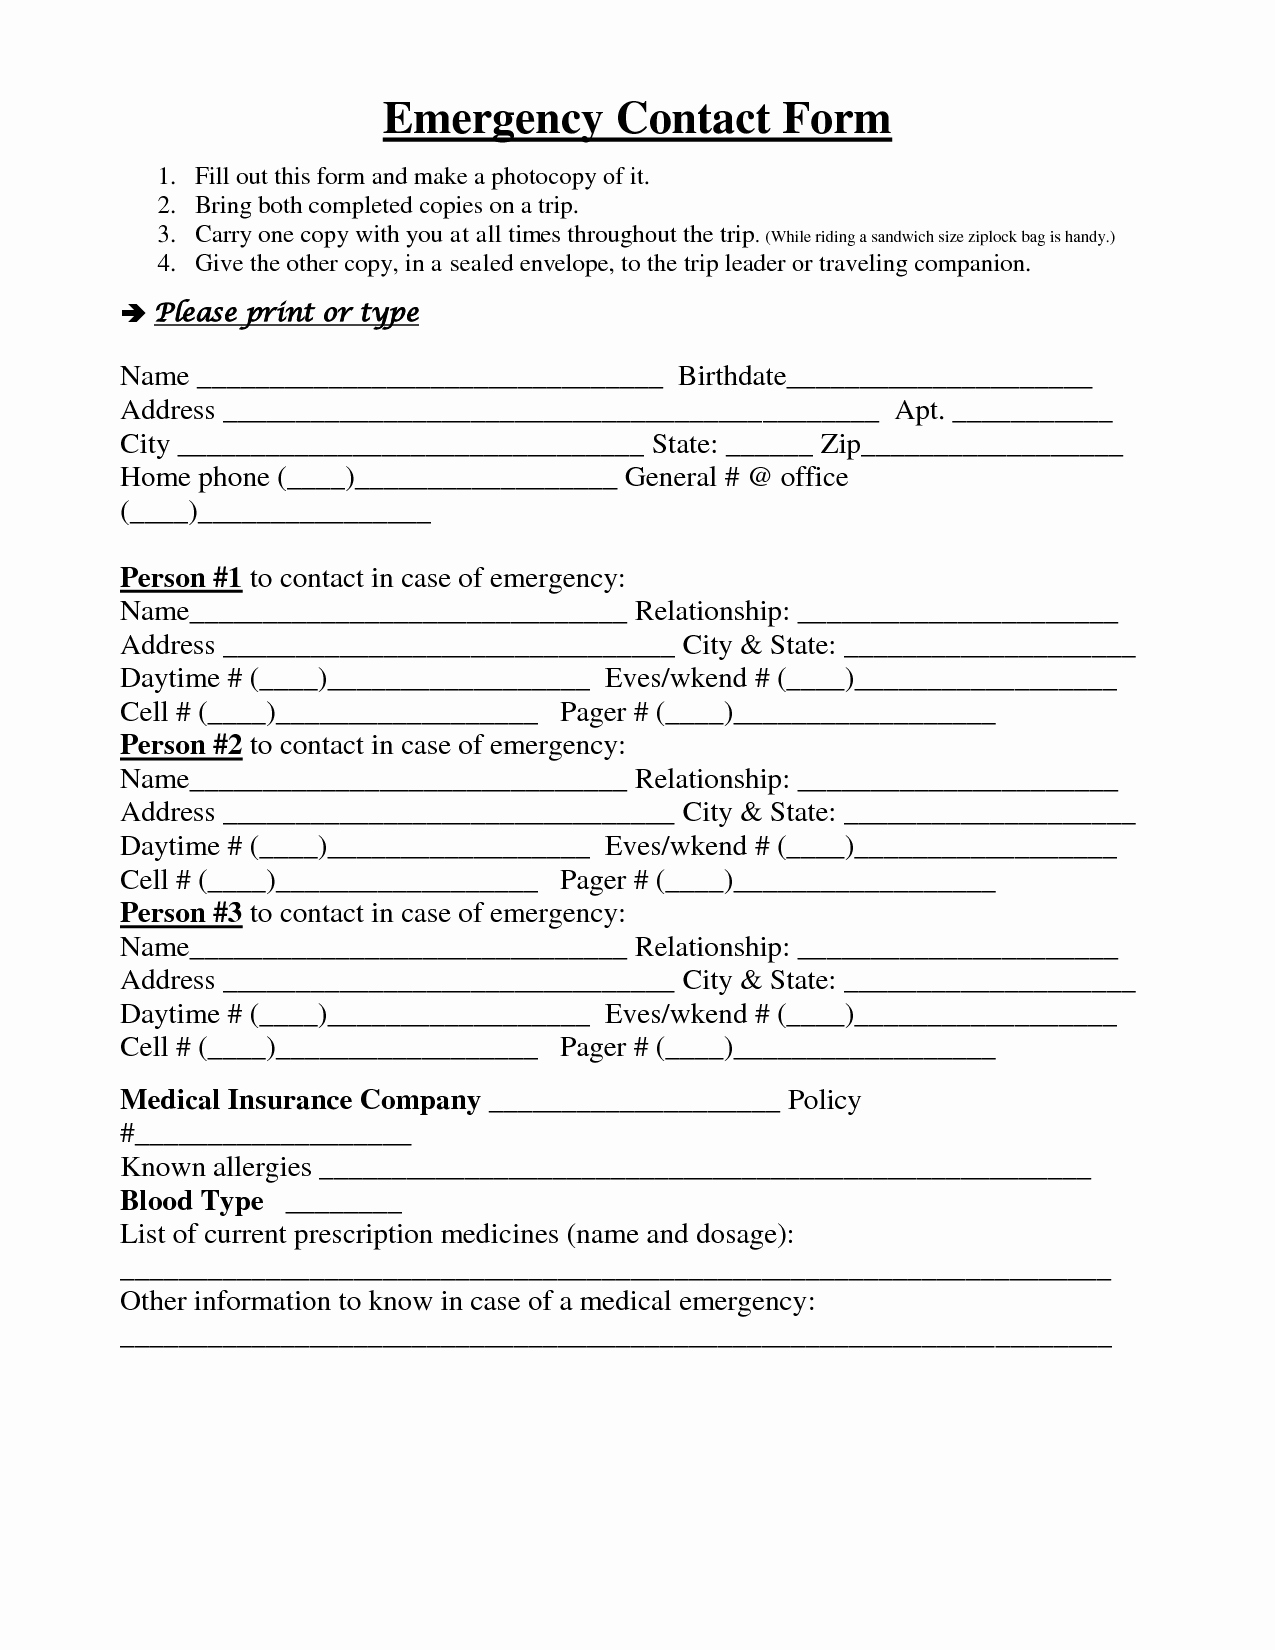 Emergency Contact form Template Free Luxury 7 Best Of Emergency Contact Printable form